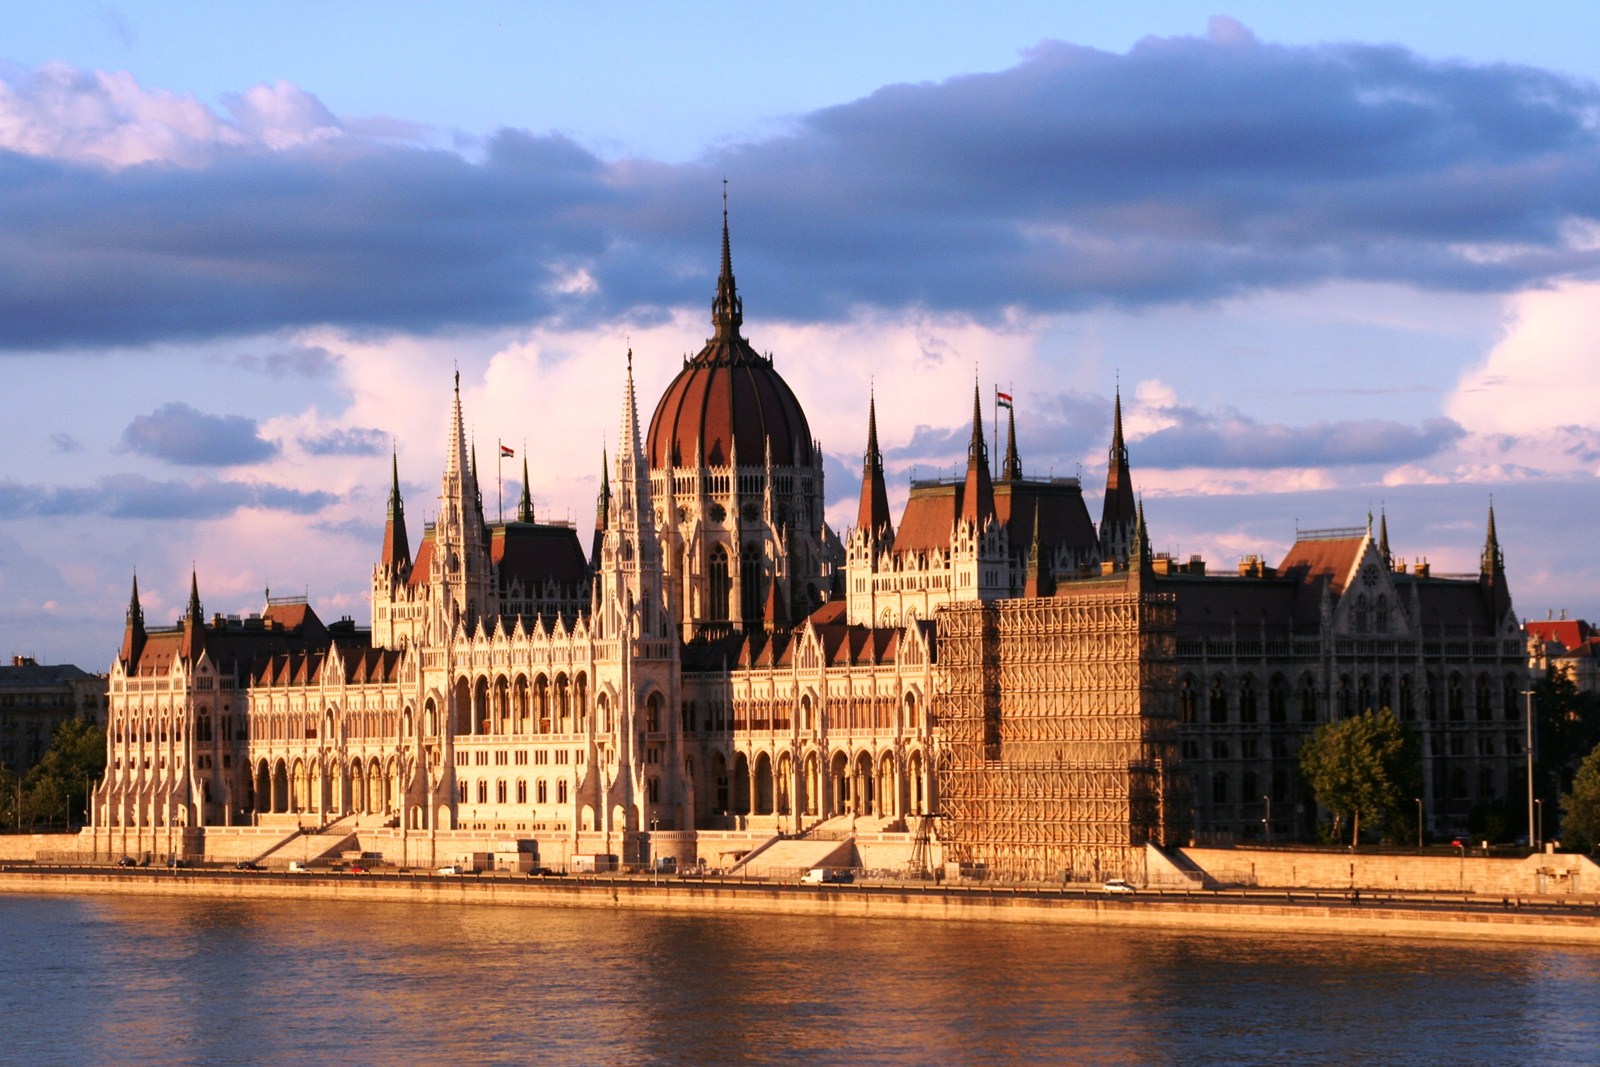 Folklore festival "The Pearl of Danube" Budapest 2023 - Official page